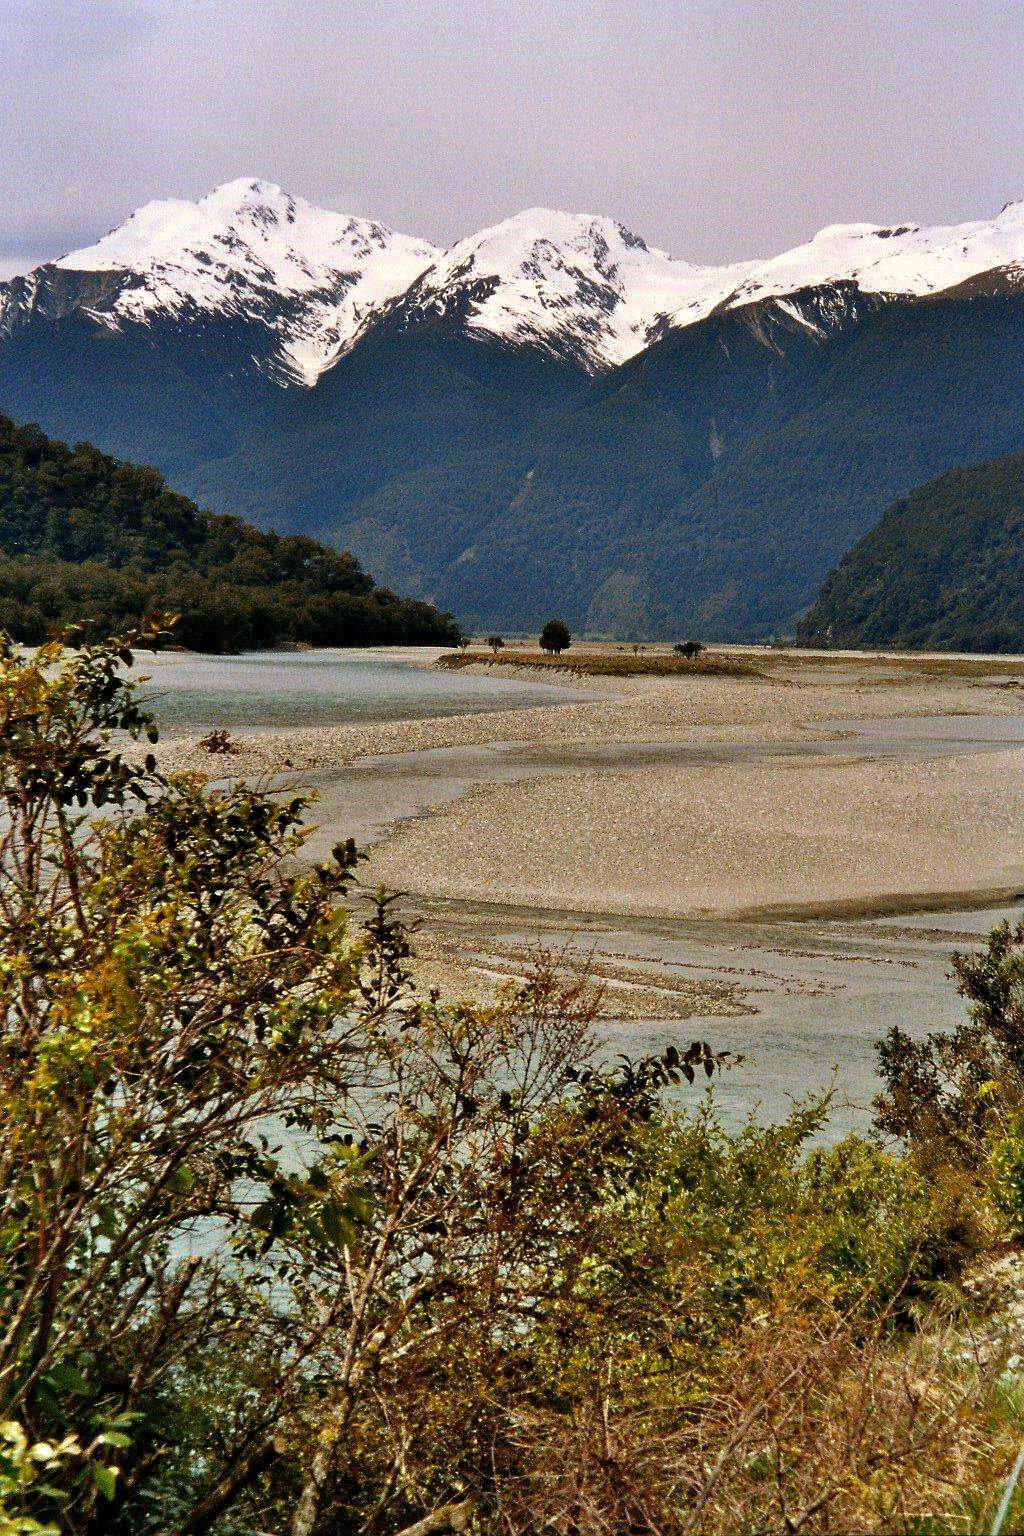 The southern alps